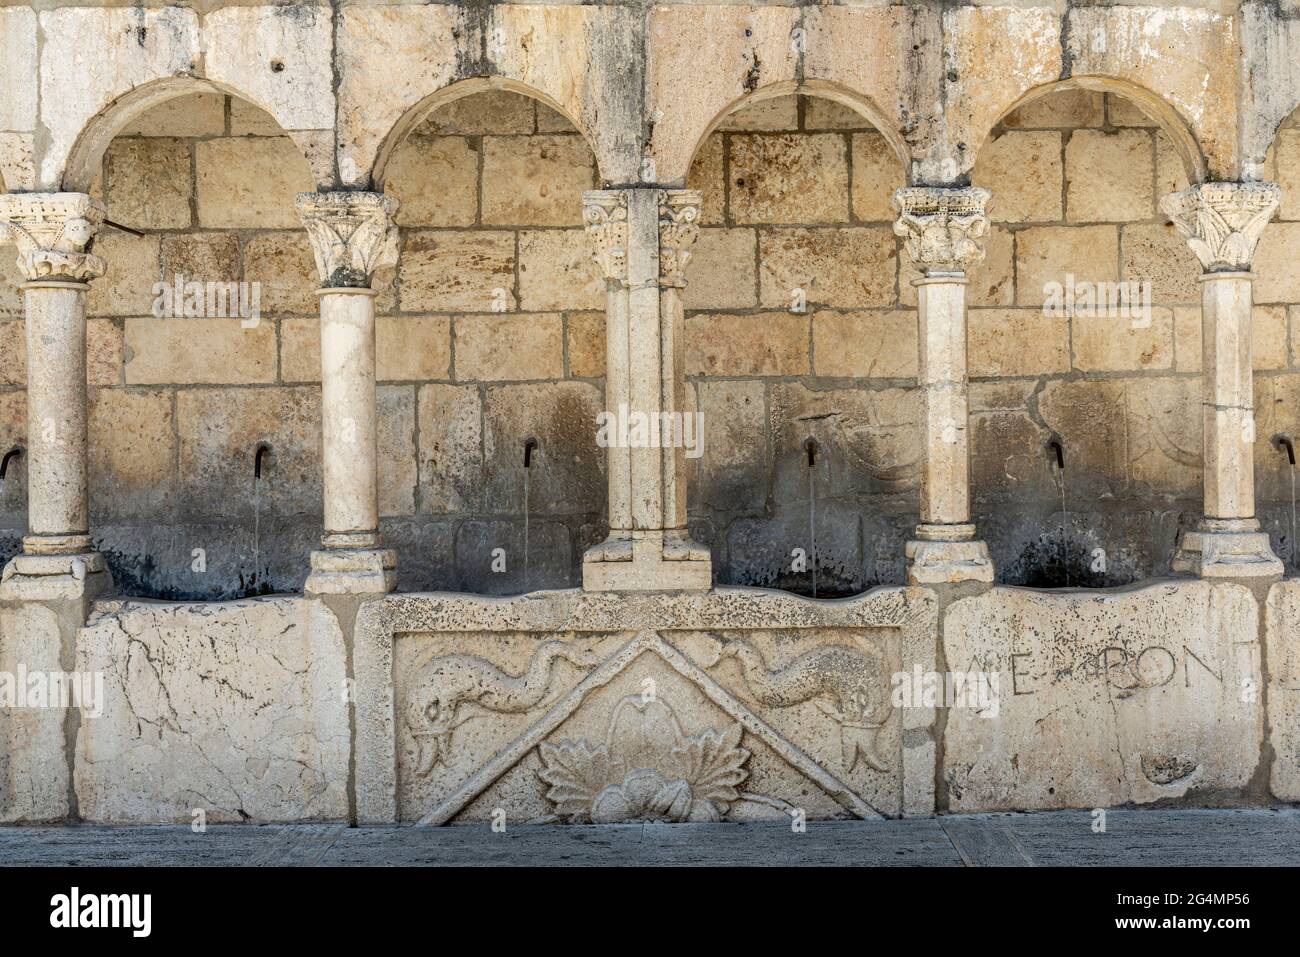 The 'Fontana Fraterna' is a public source of the city of Isernia, of which it is considered a symbol. Isernia, Molise, Italy, Europe Stock Photo